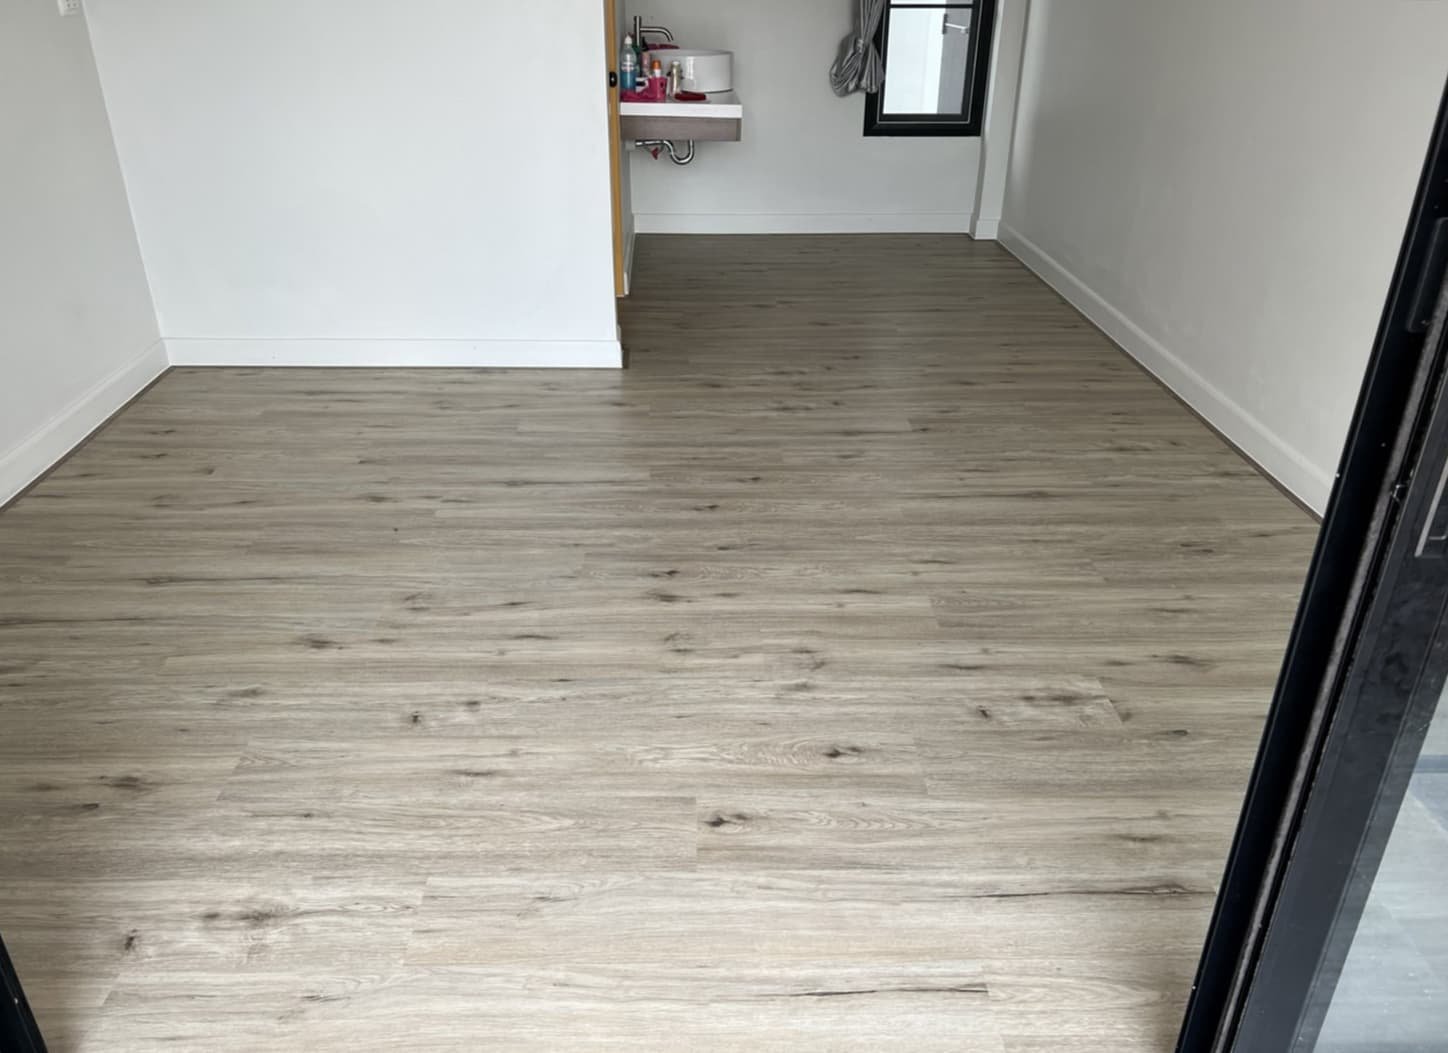 OUR CUSTOMER - LAMINATE